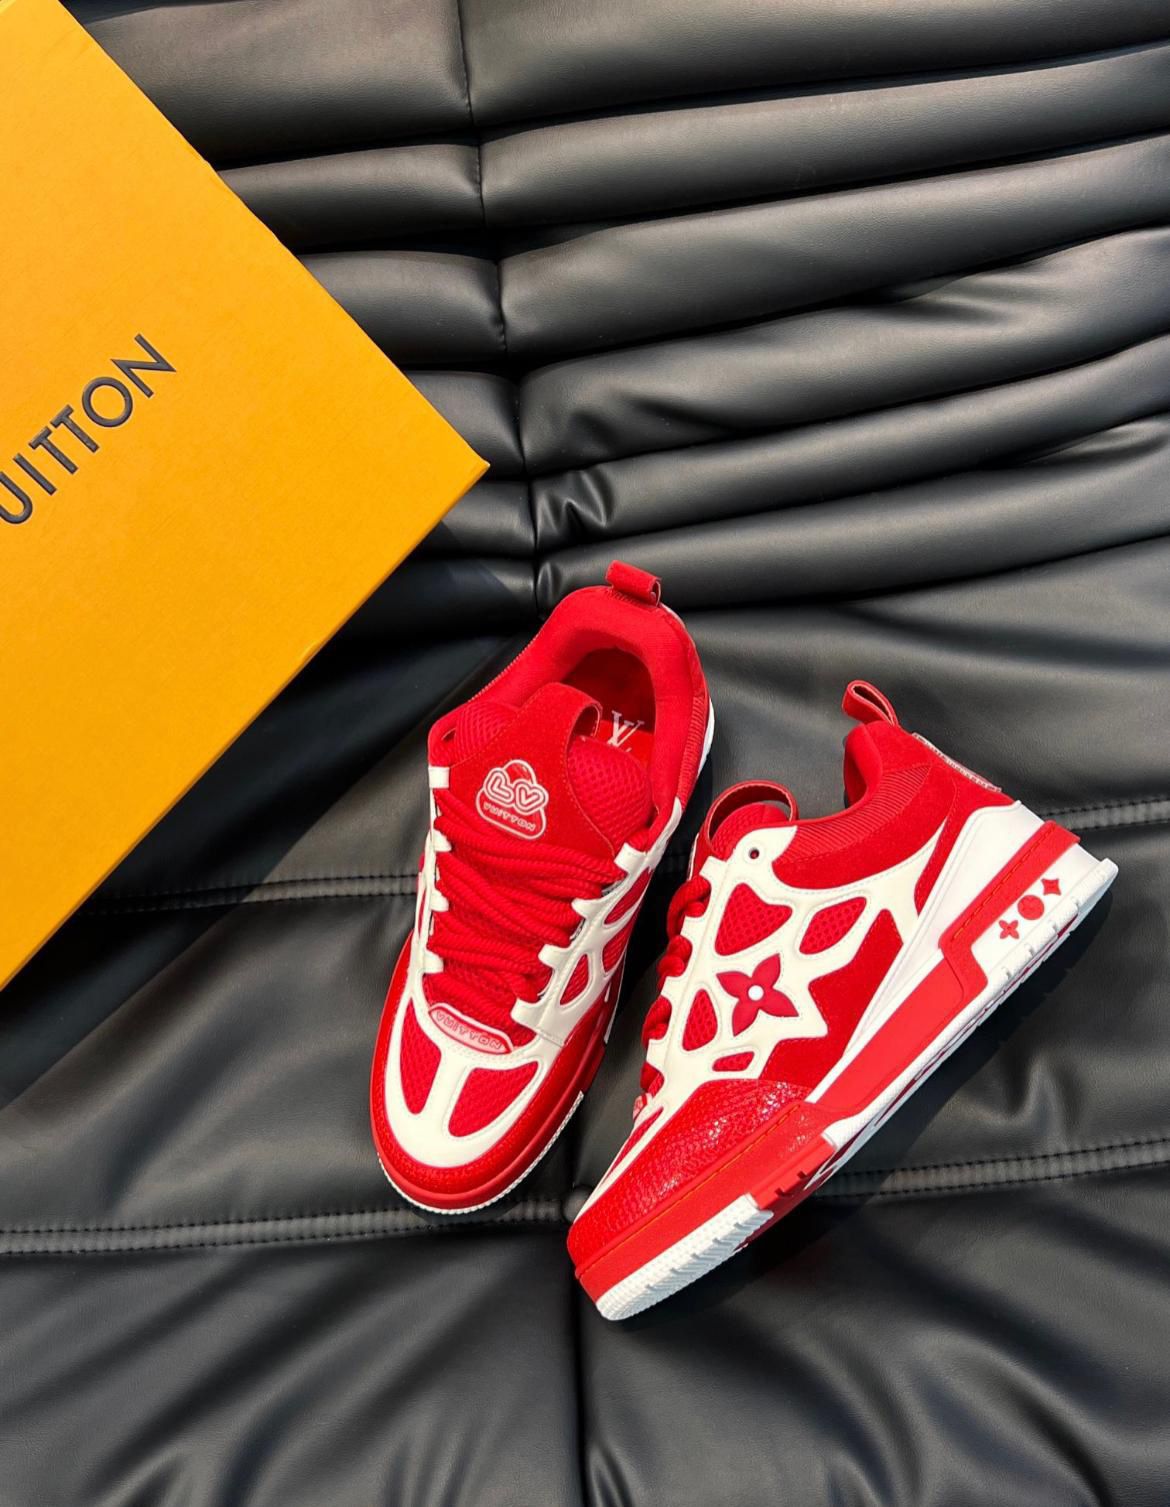 Louis Vuitton LV Skate Sneaker - Red/White for Sale in Dallas, TX - OfferUp